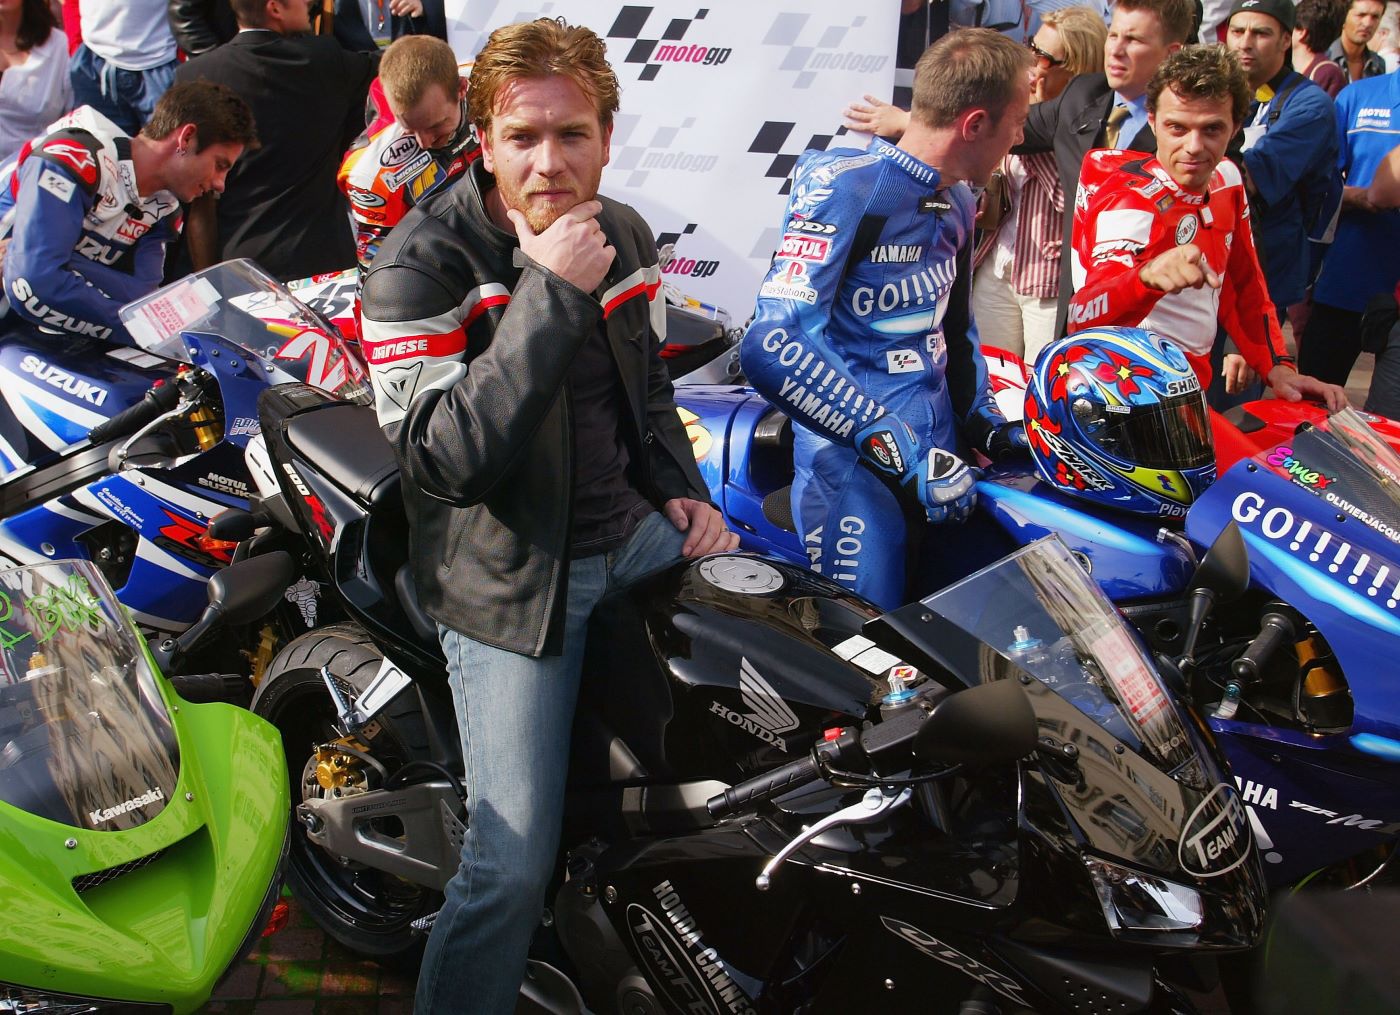 Ewan McGregor on a sports bike dressed in motorcycle gear surrounded by other motorcycles and their riders.